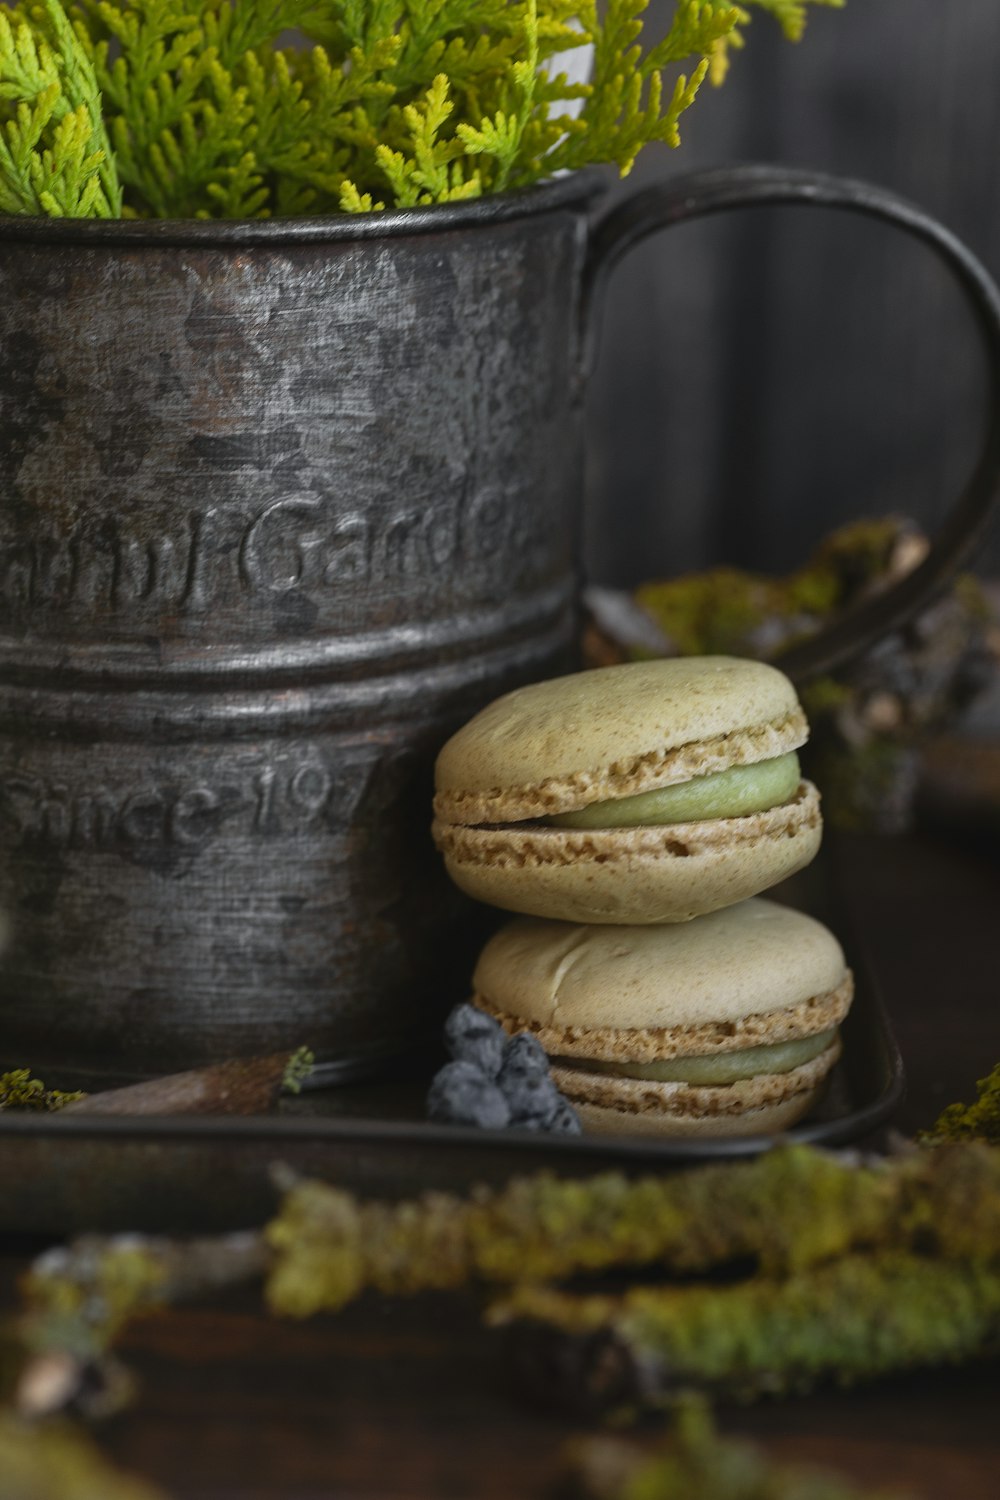 a potted plant sitting next to two macaroons